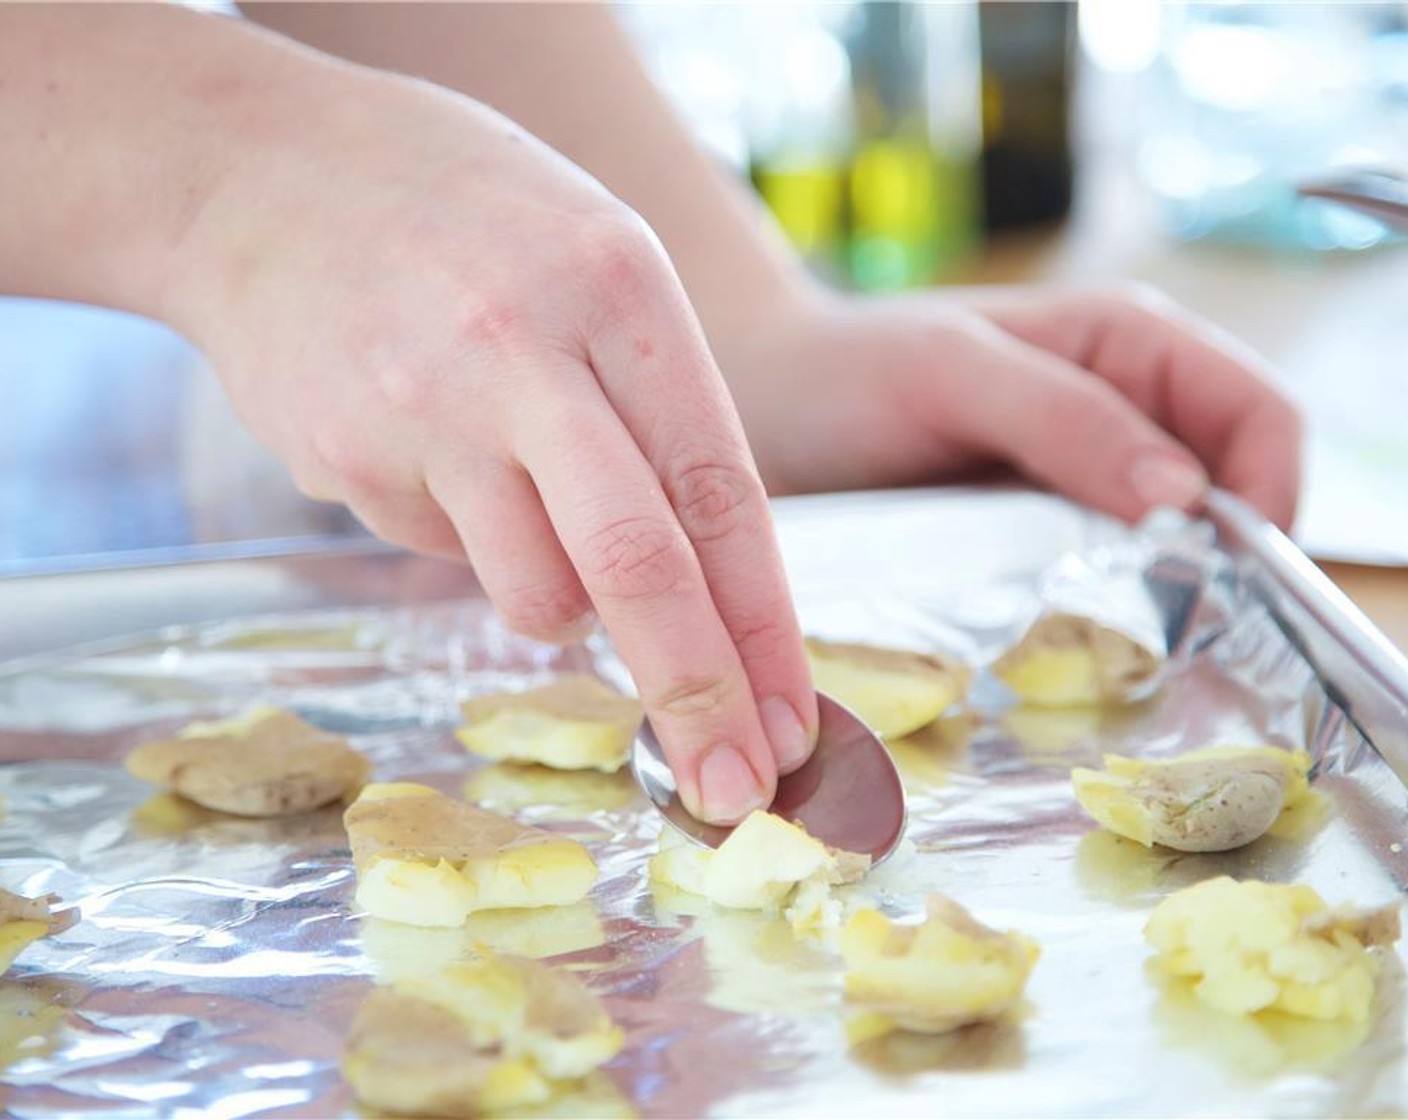 step 3 Put Fingerling Potatoes (2 1/4 cups) in medium saucepot and fill with enough water to cover potatoes. Place pot over high heat and bring to a boil. Once the water boils, cook for 5 minutes. Drain potatoes. Spread onto the foil lined sheet pan.